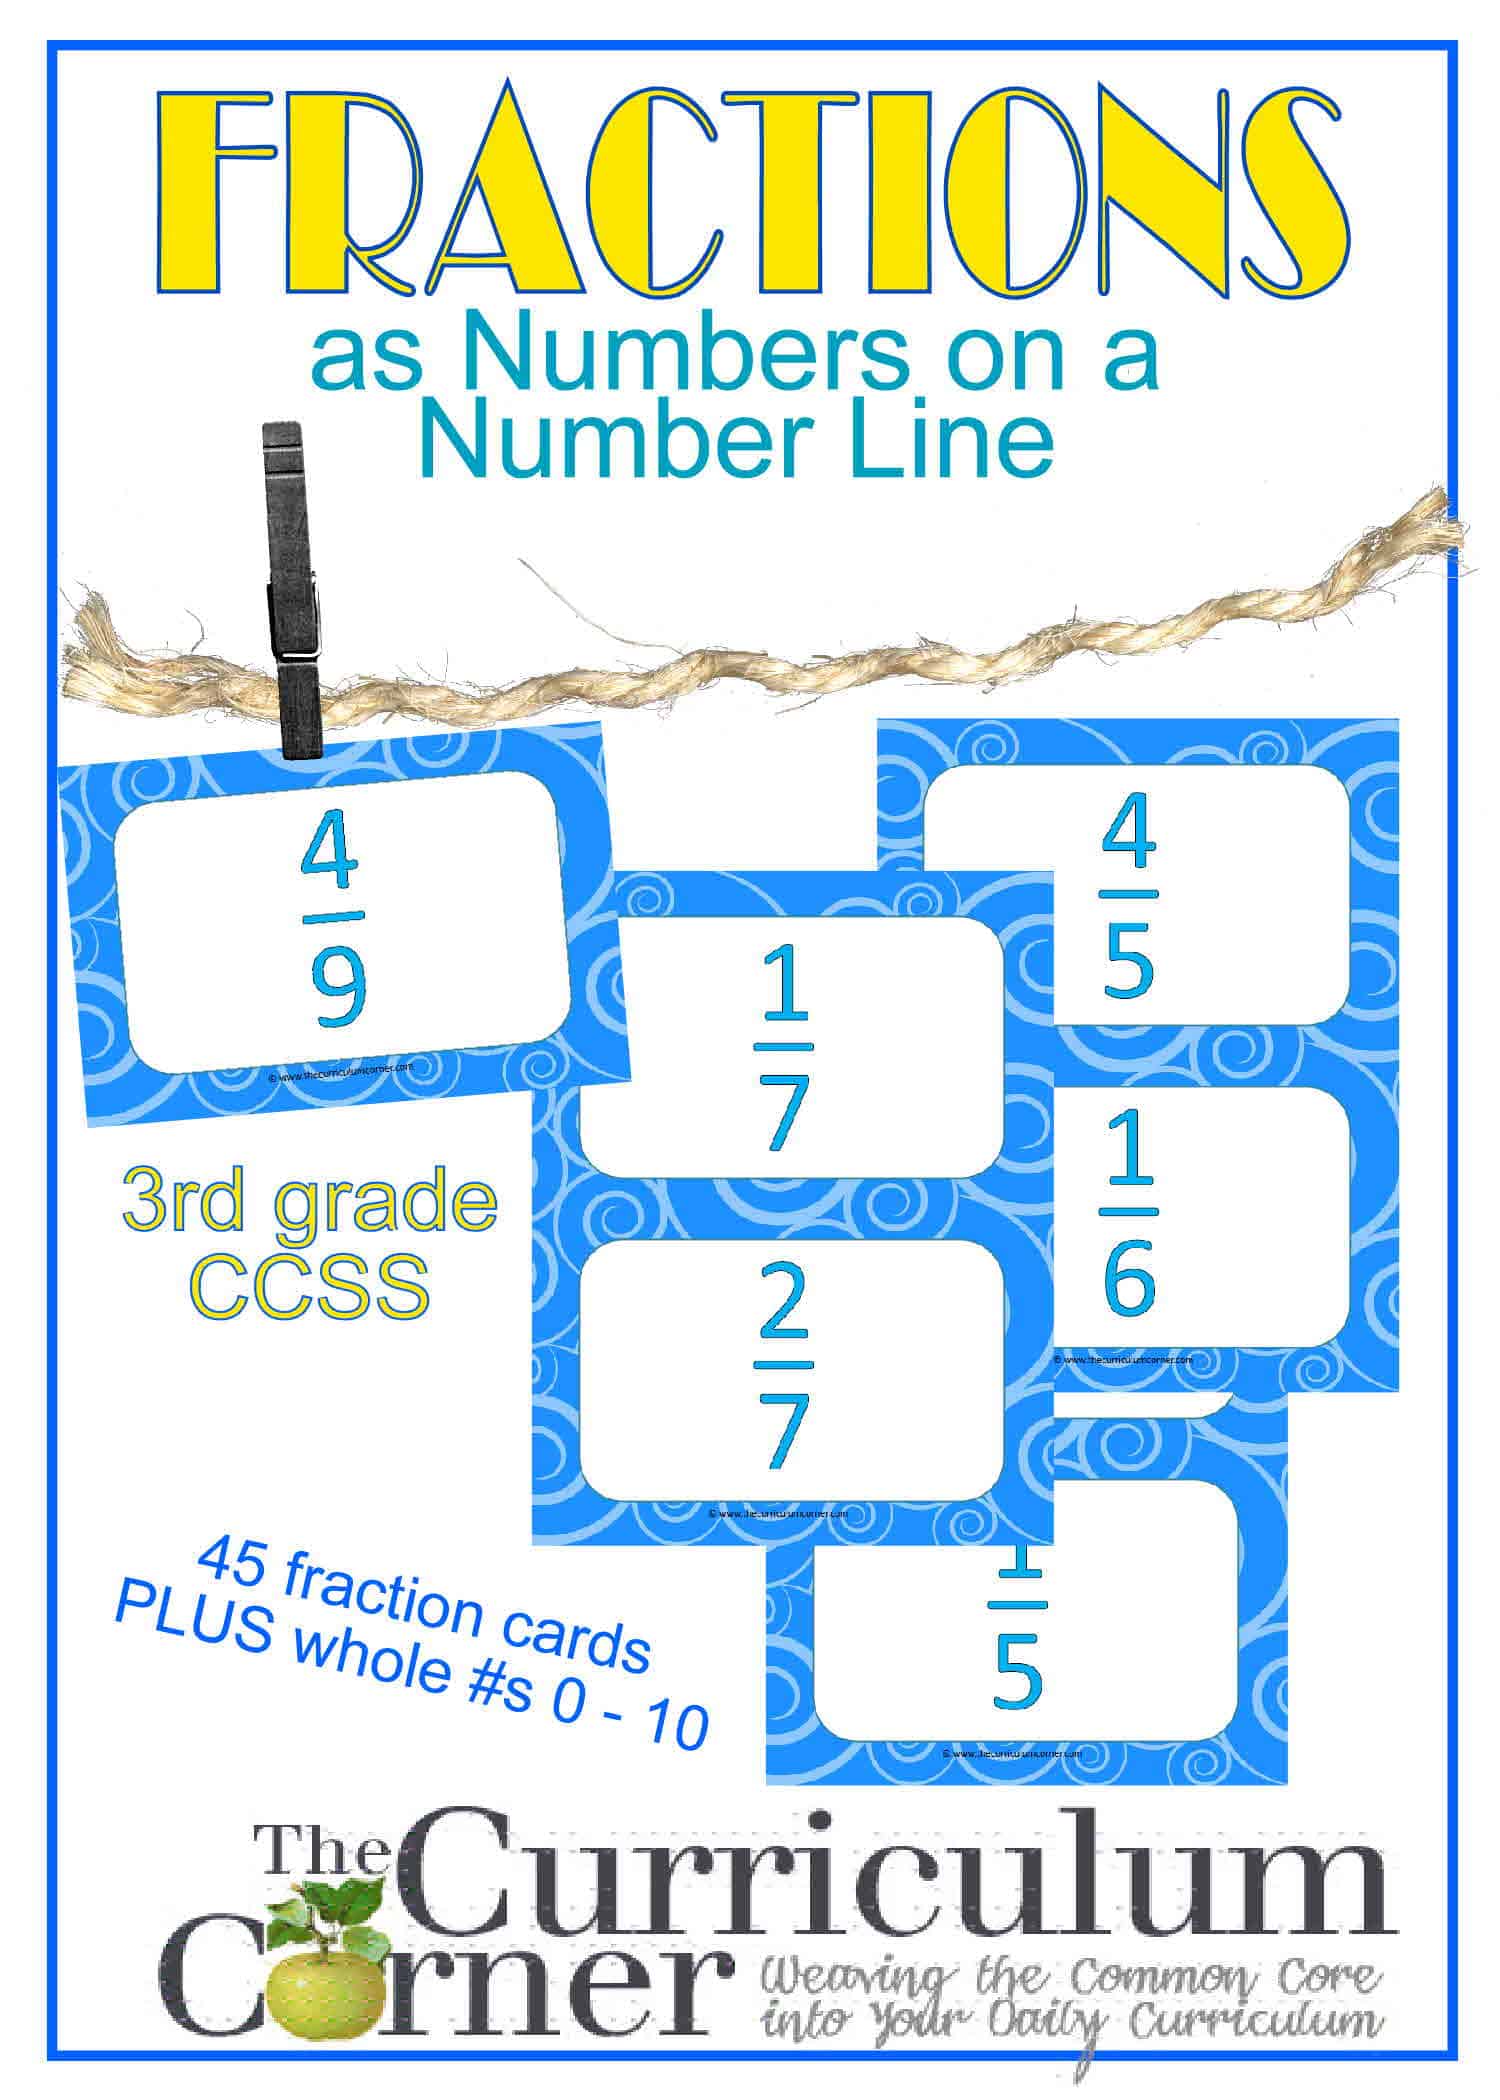 fractions-as-numbers-on-a-number-line-the-curriculum-corner-123